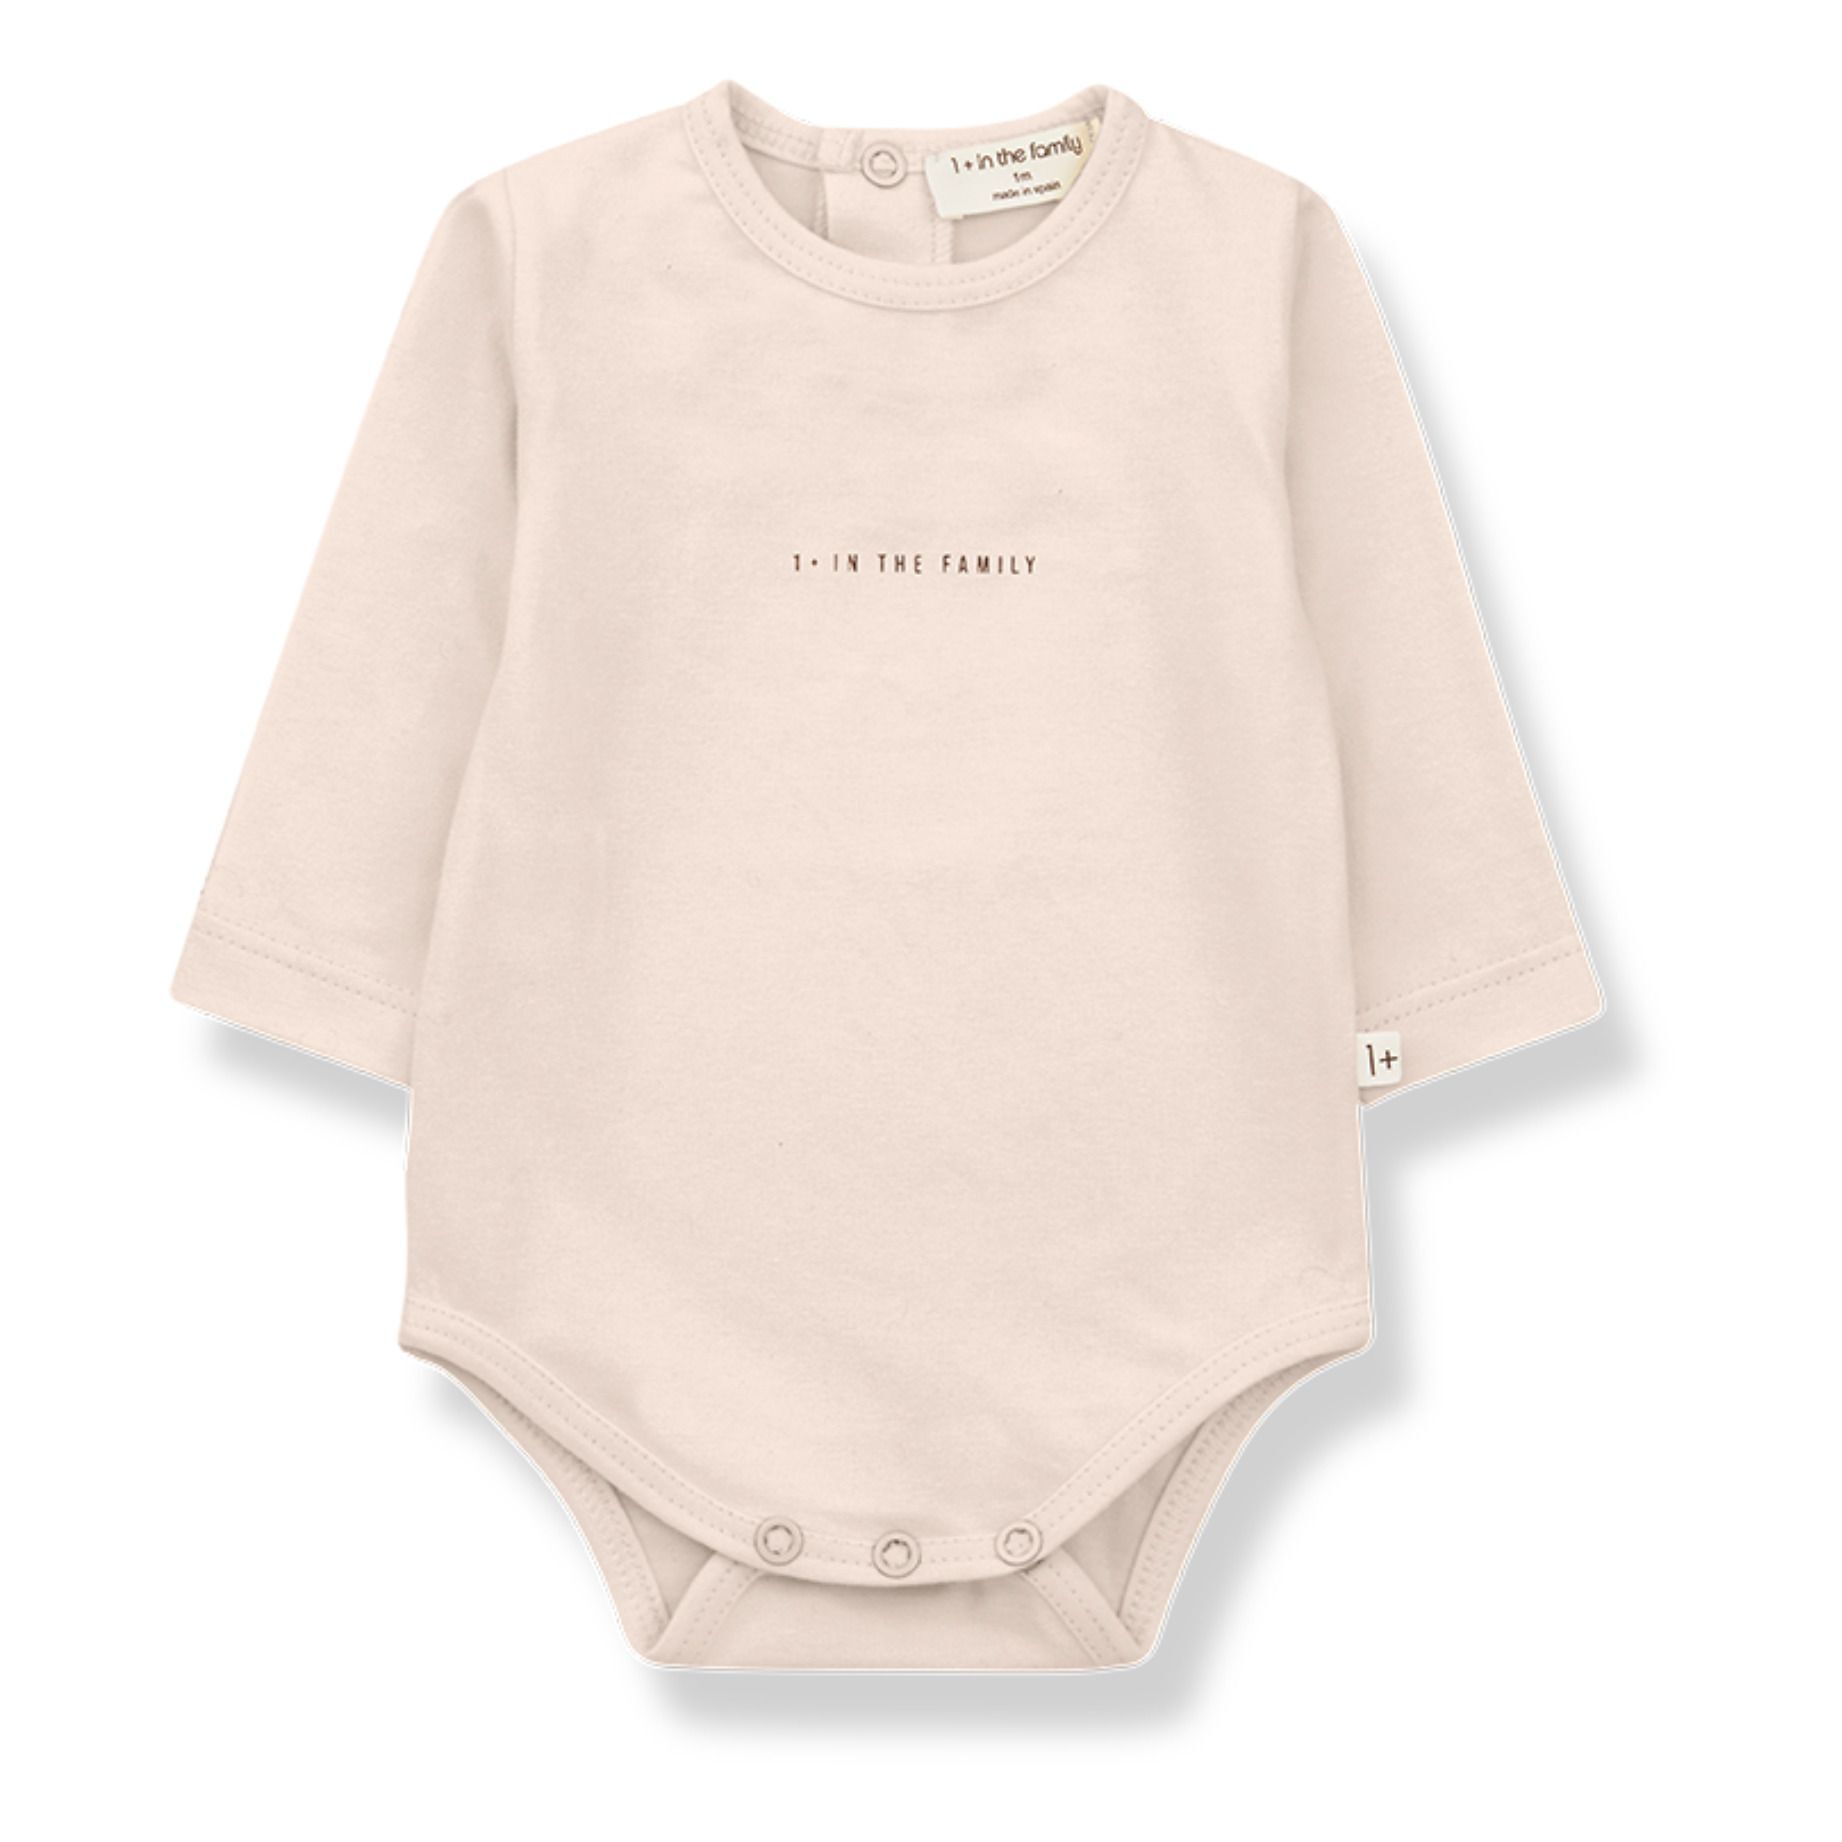 1+ in the family Lis Organic Cotton Baby Bodysuits - Set of 2 Powder pink Birth Girl